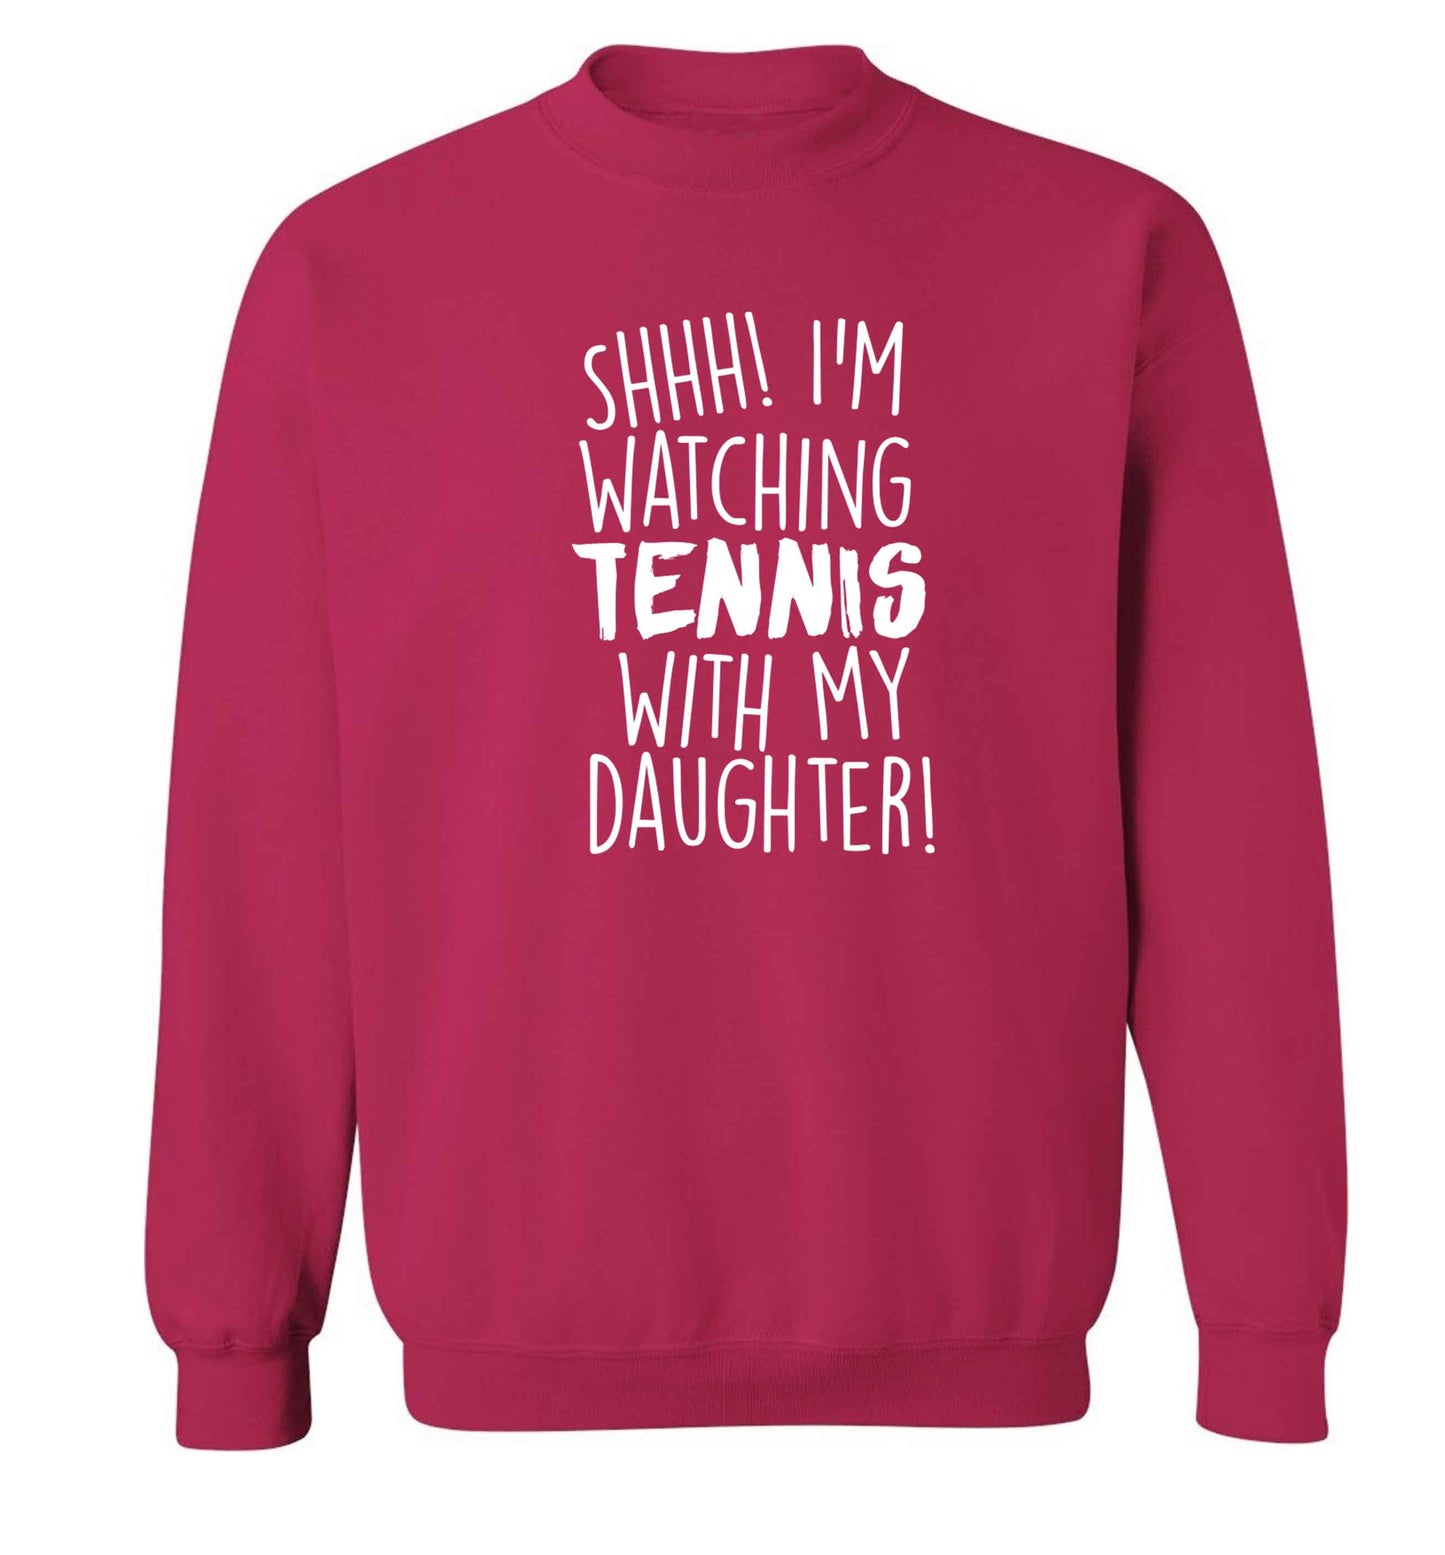 Shh! I'm watching tennis with my daughter! Adult's unisex pink Sweater 2XL